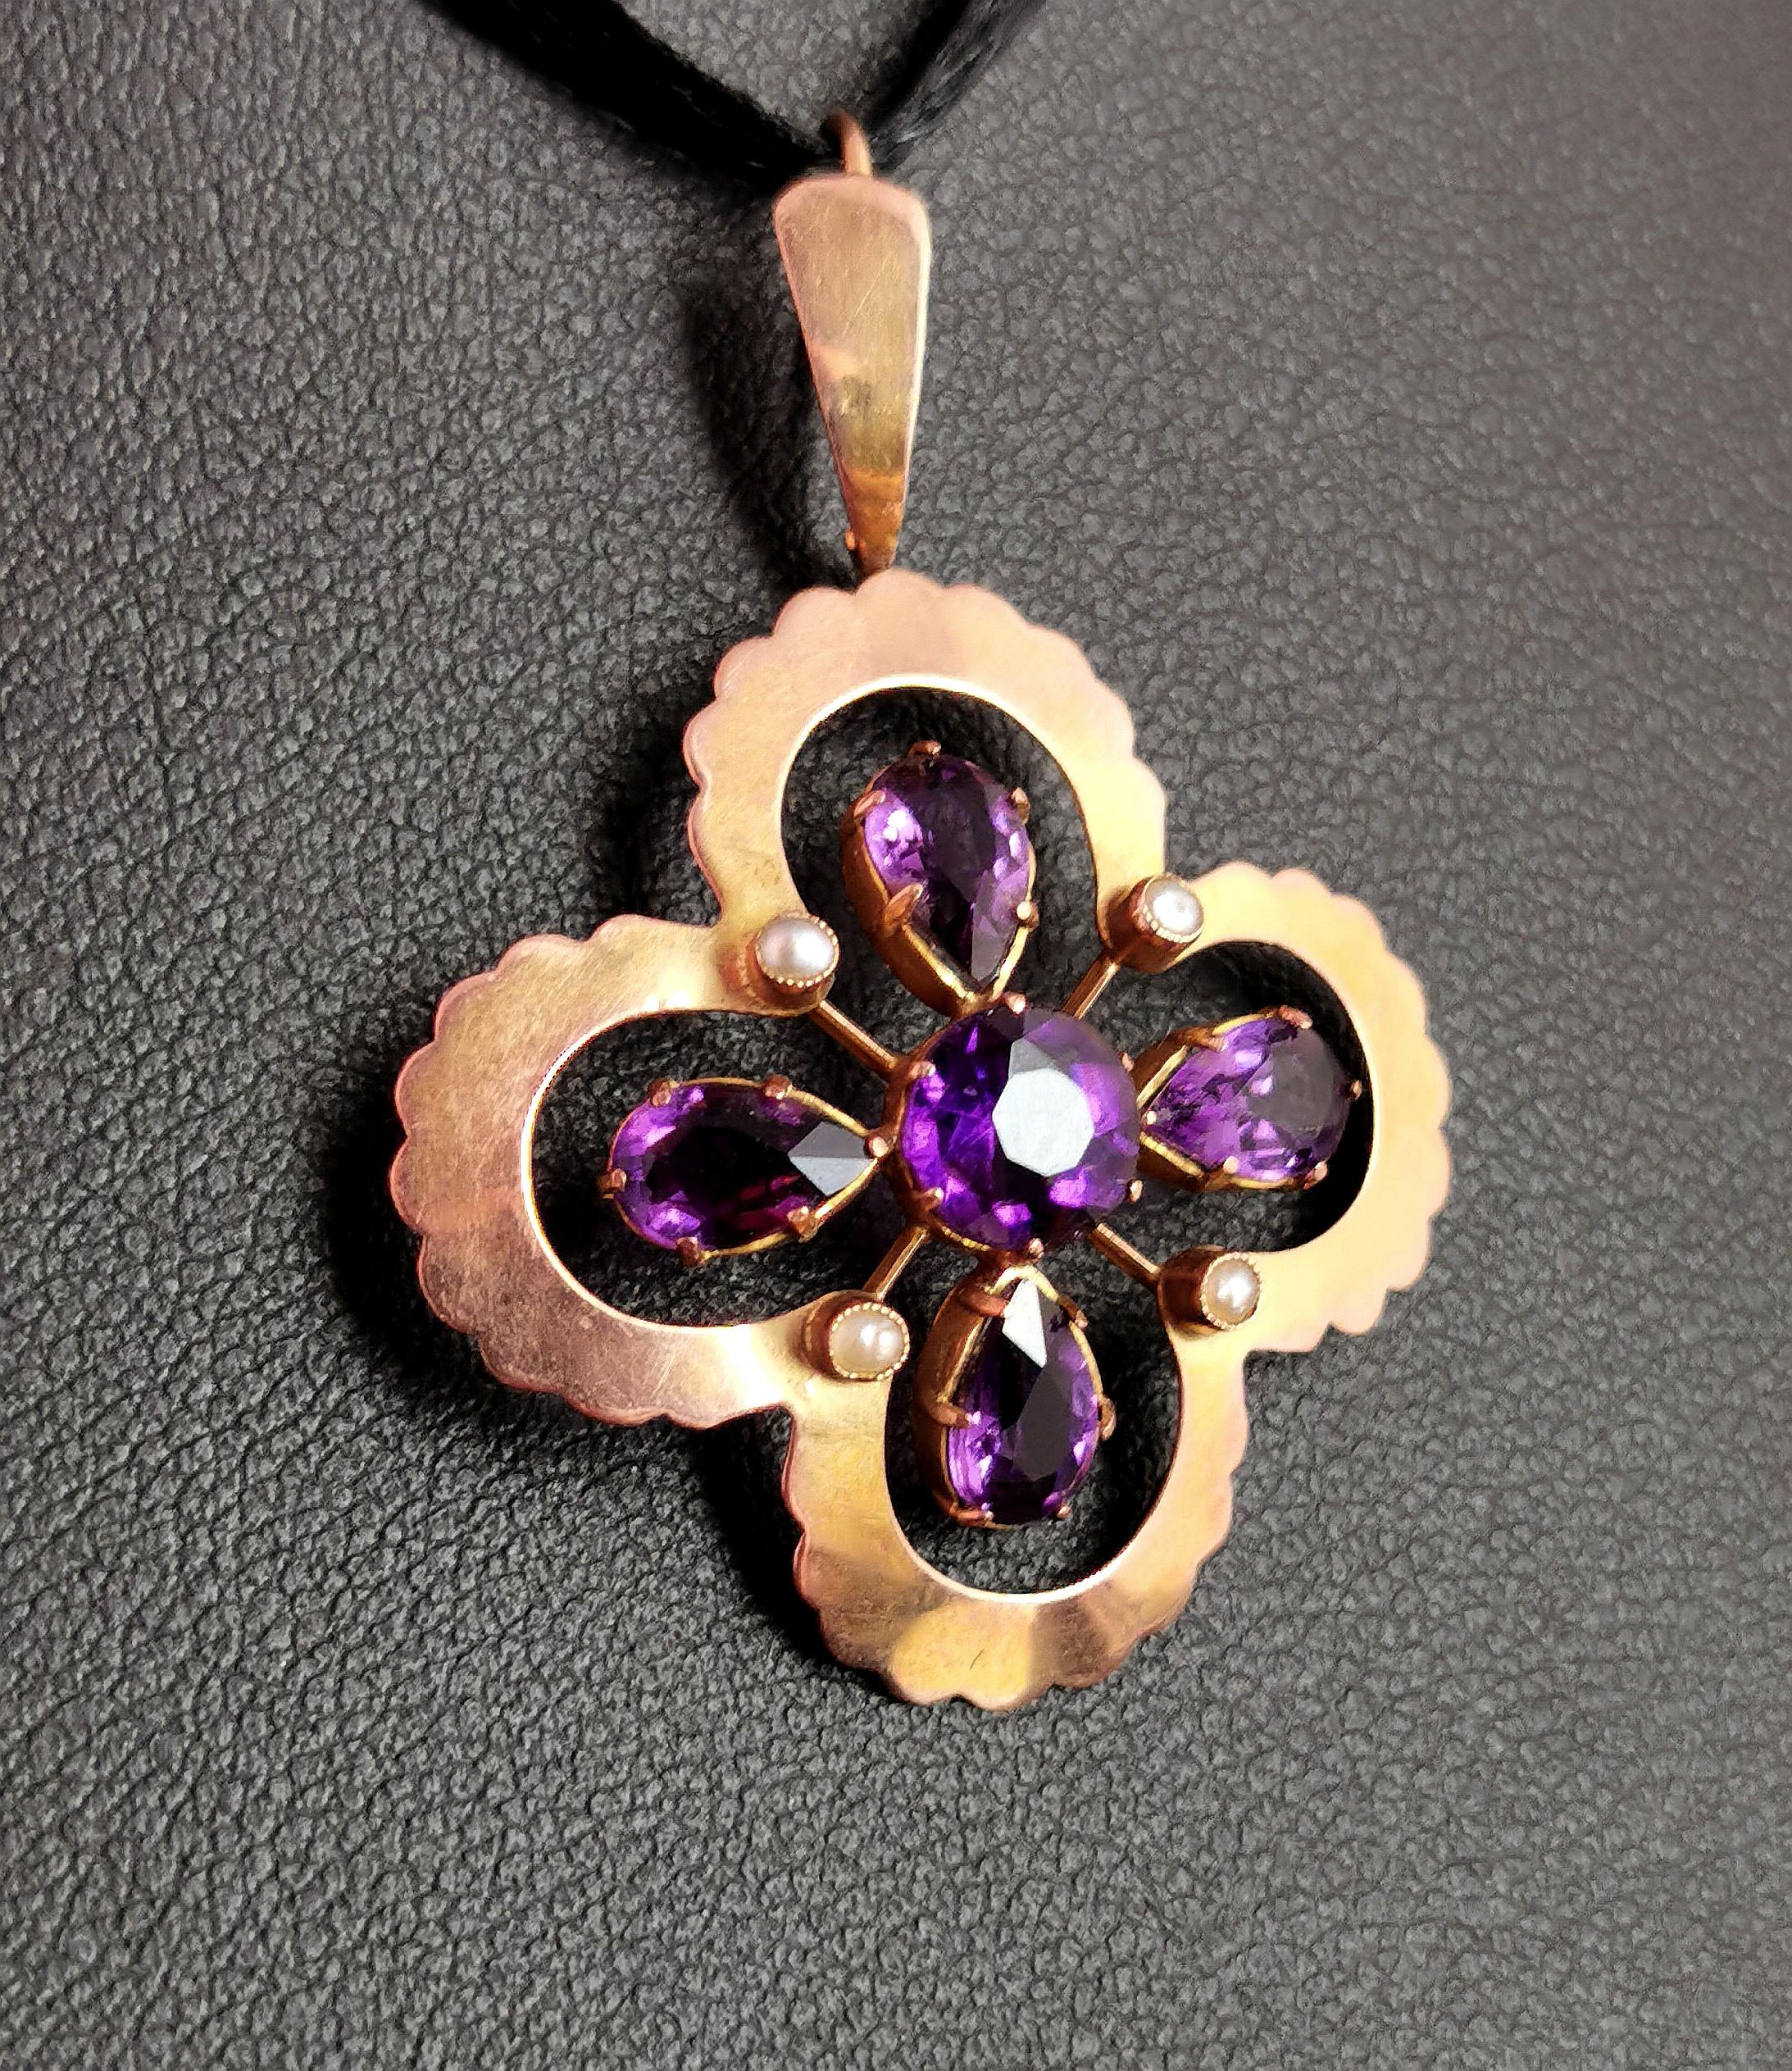 A beautiful antique, Art Nouveau era Amethyst and seed pearl pendant.

The pendant has an unusual Quatrefoil design in a rich 9ct gold with a scalloped edge and an integral bale.

To the centre there is a floral type of arrangement of rich purple